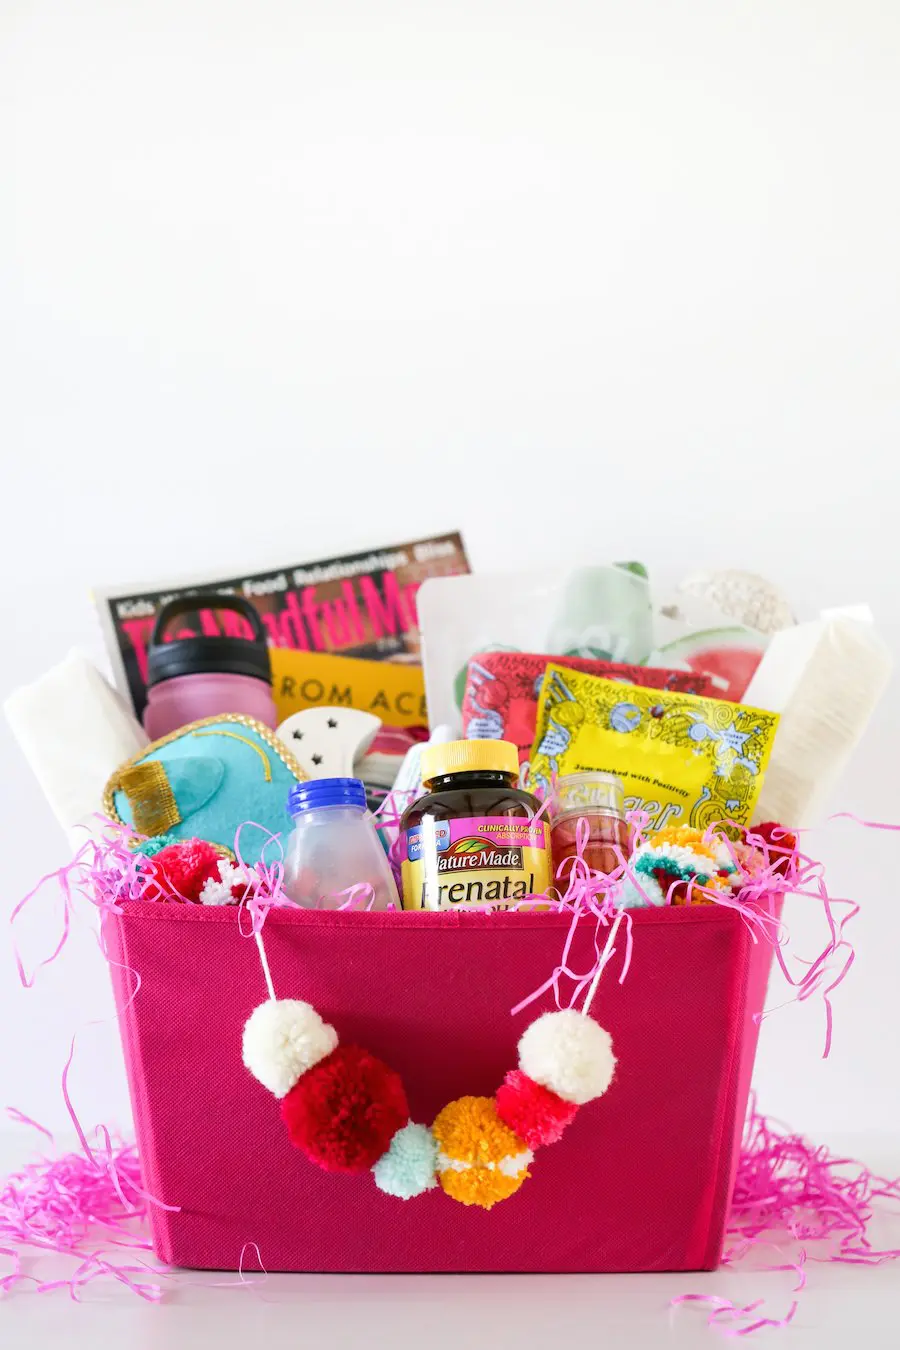 DIY Pregnancy Survival Kit Gift Basket, Pregnancy Care Package, Maternity Care Package, First Trimester, 1st Trimester, Pregnancy Gifts for Friends, Gifts for Pregnant Women, Mama to Be Gift Basket, DIY, Salty Canary